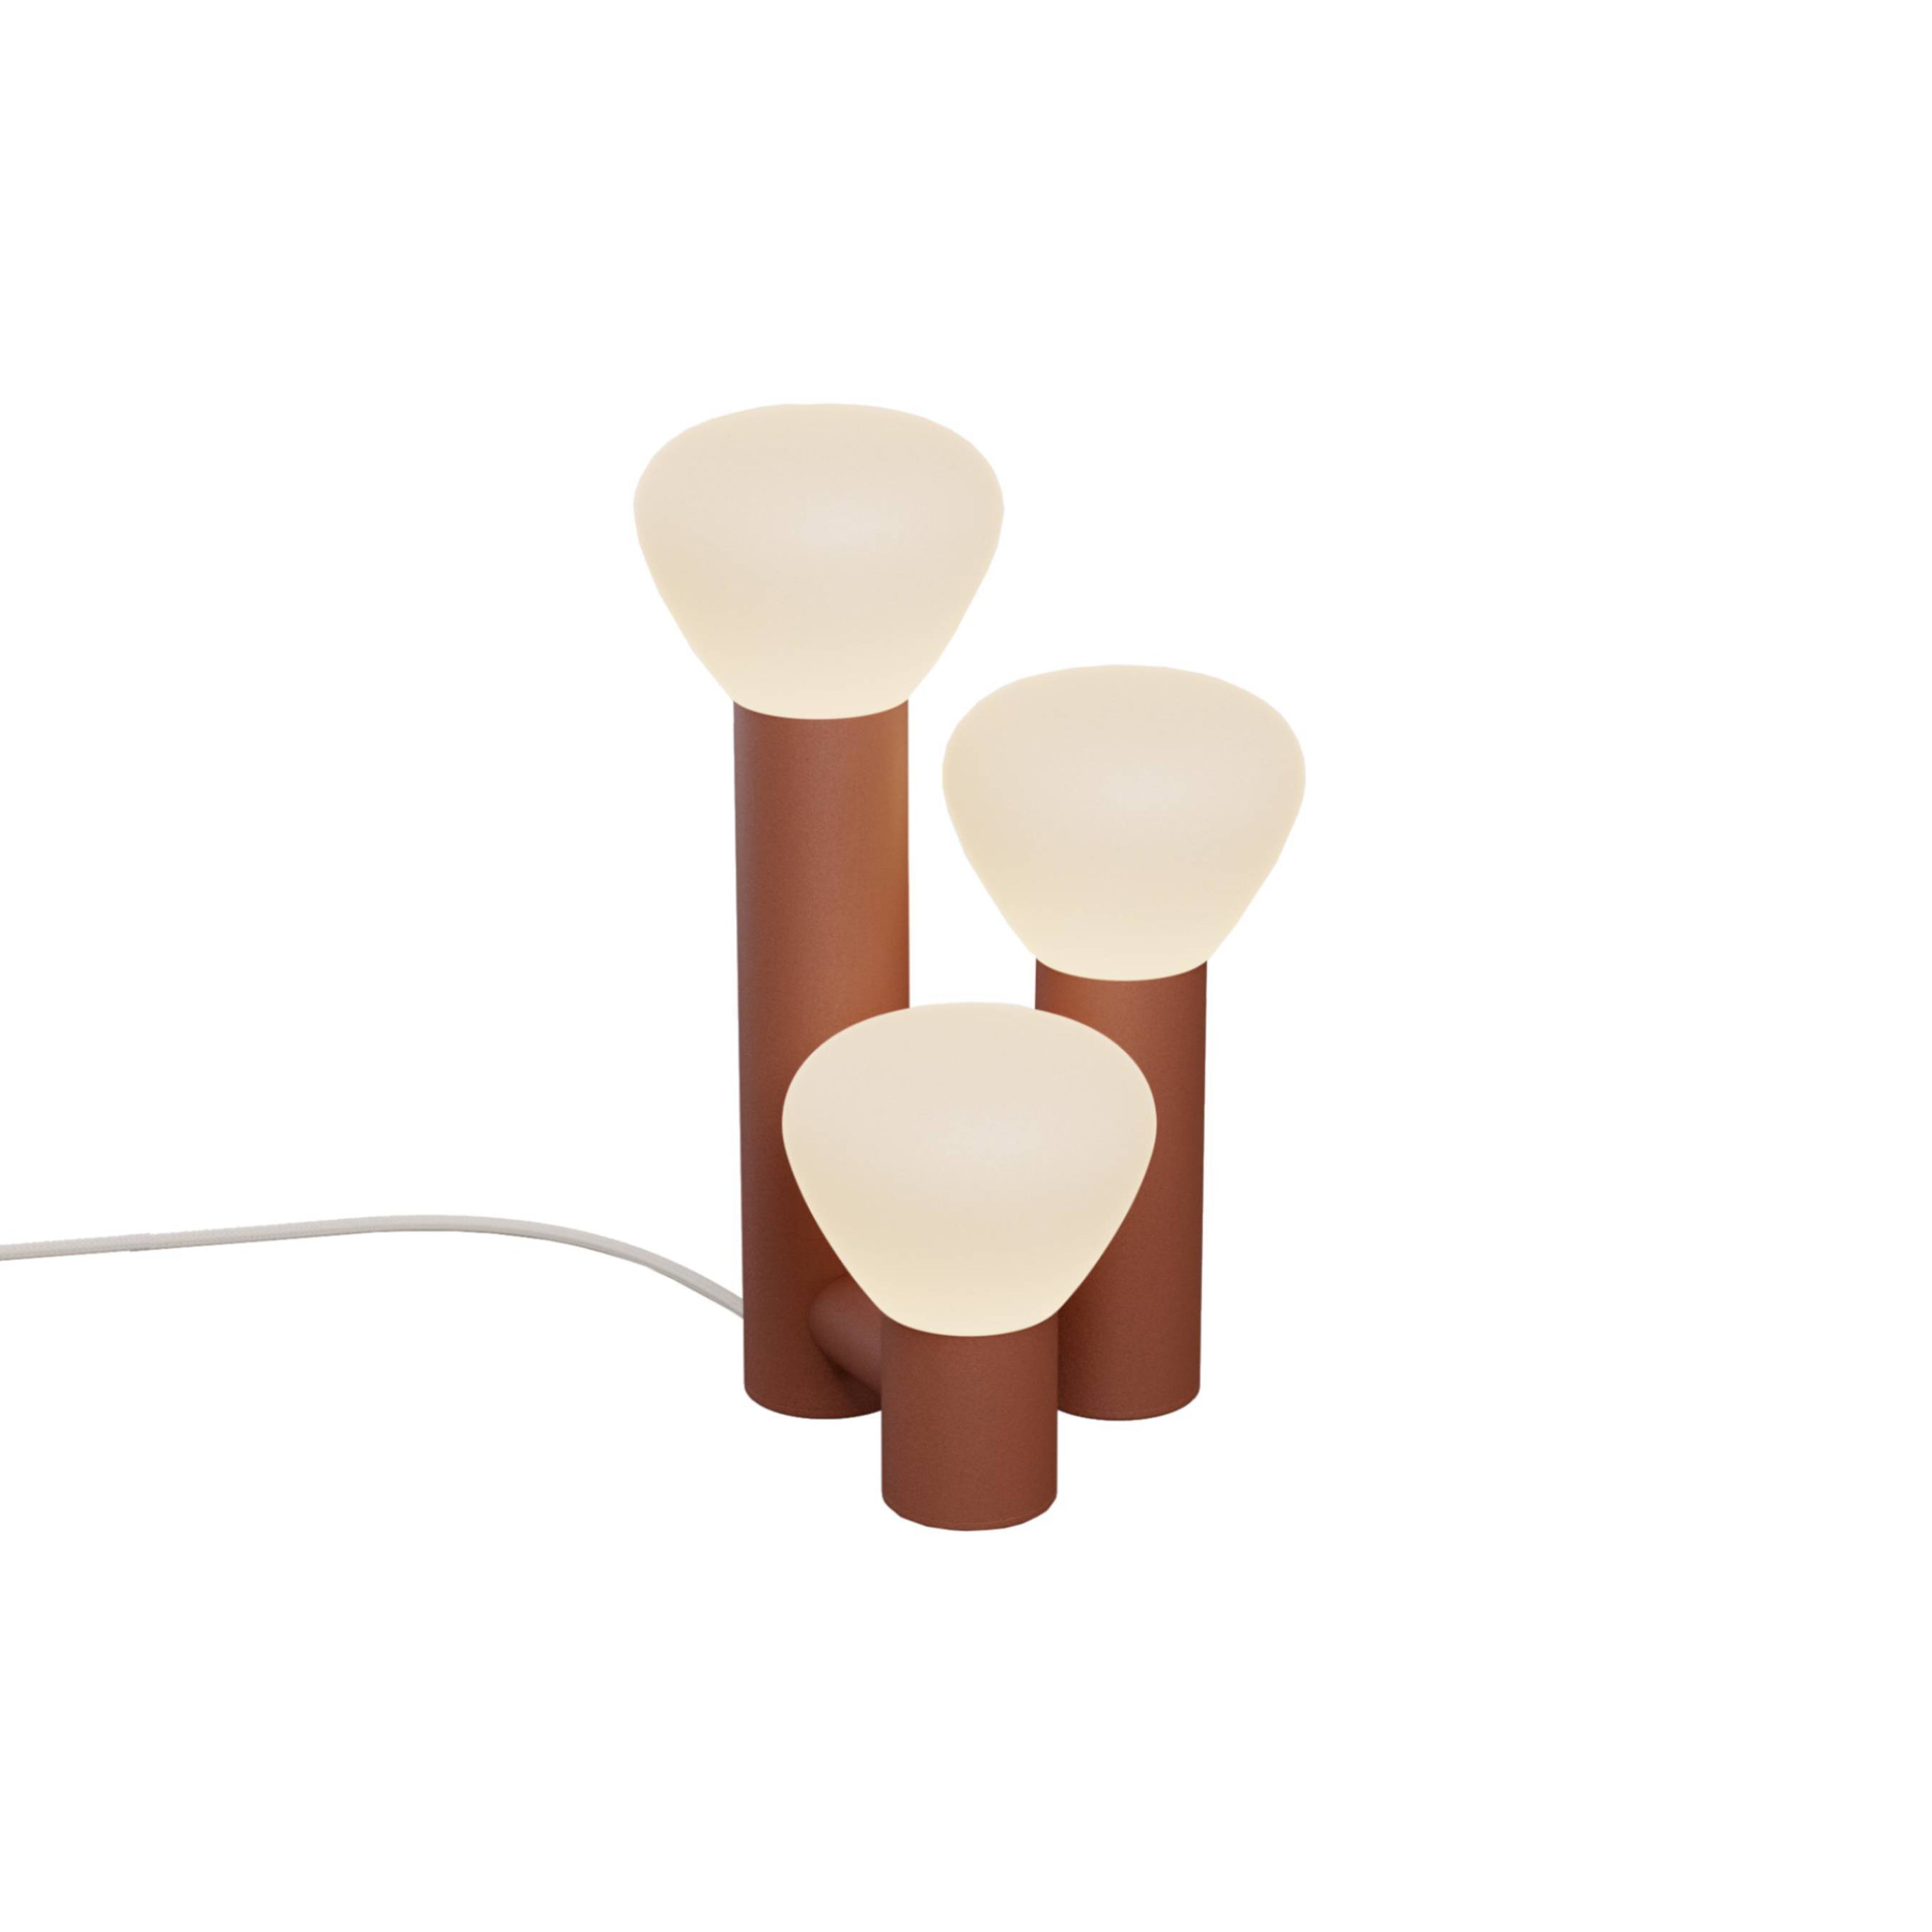 Parc 06 Table Lamp: Handswitch +  Terracotta + Beige